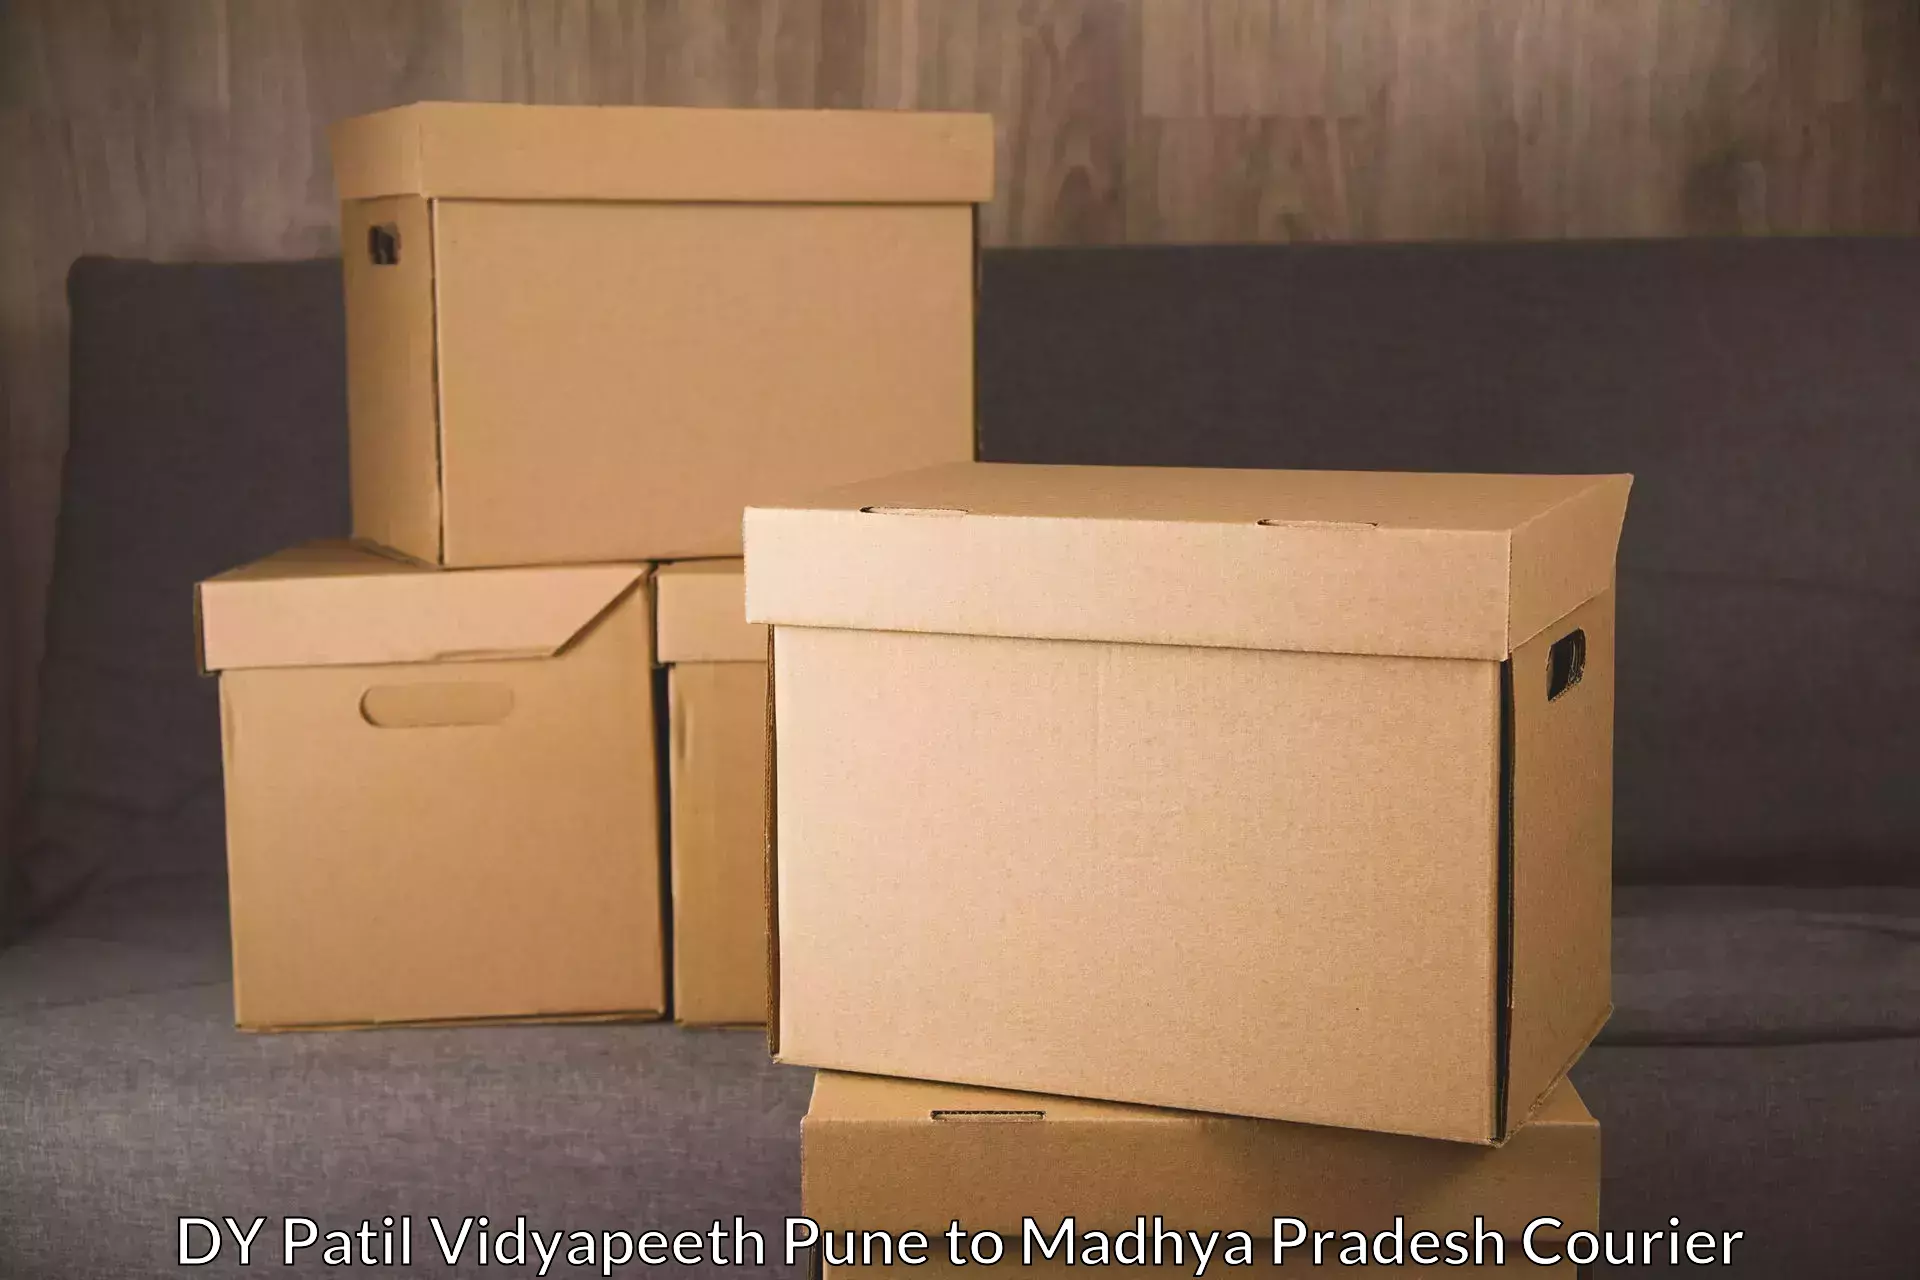 Advanced freight services DY Patil Vidyapeeth Pune to Agar